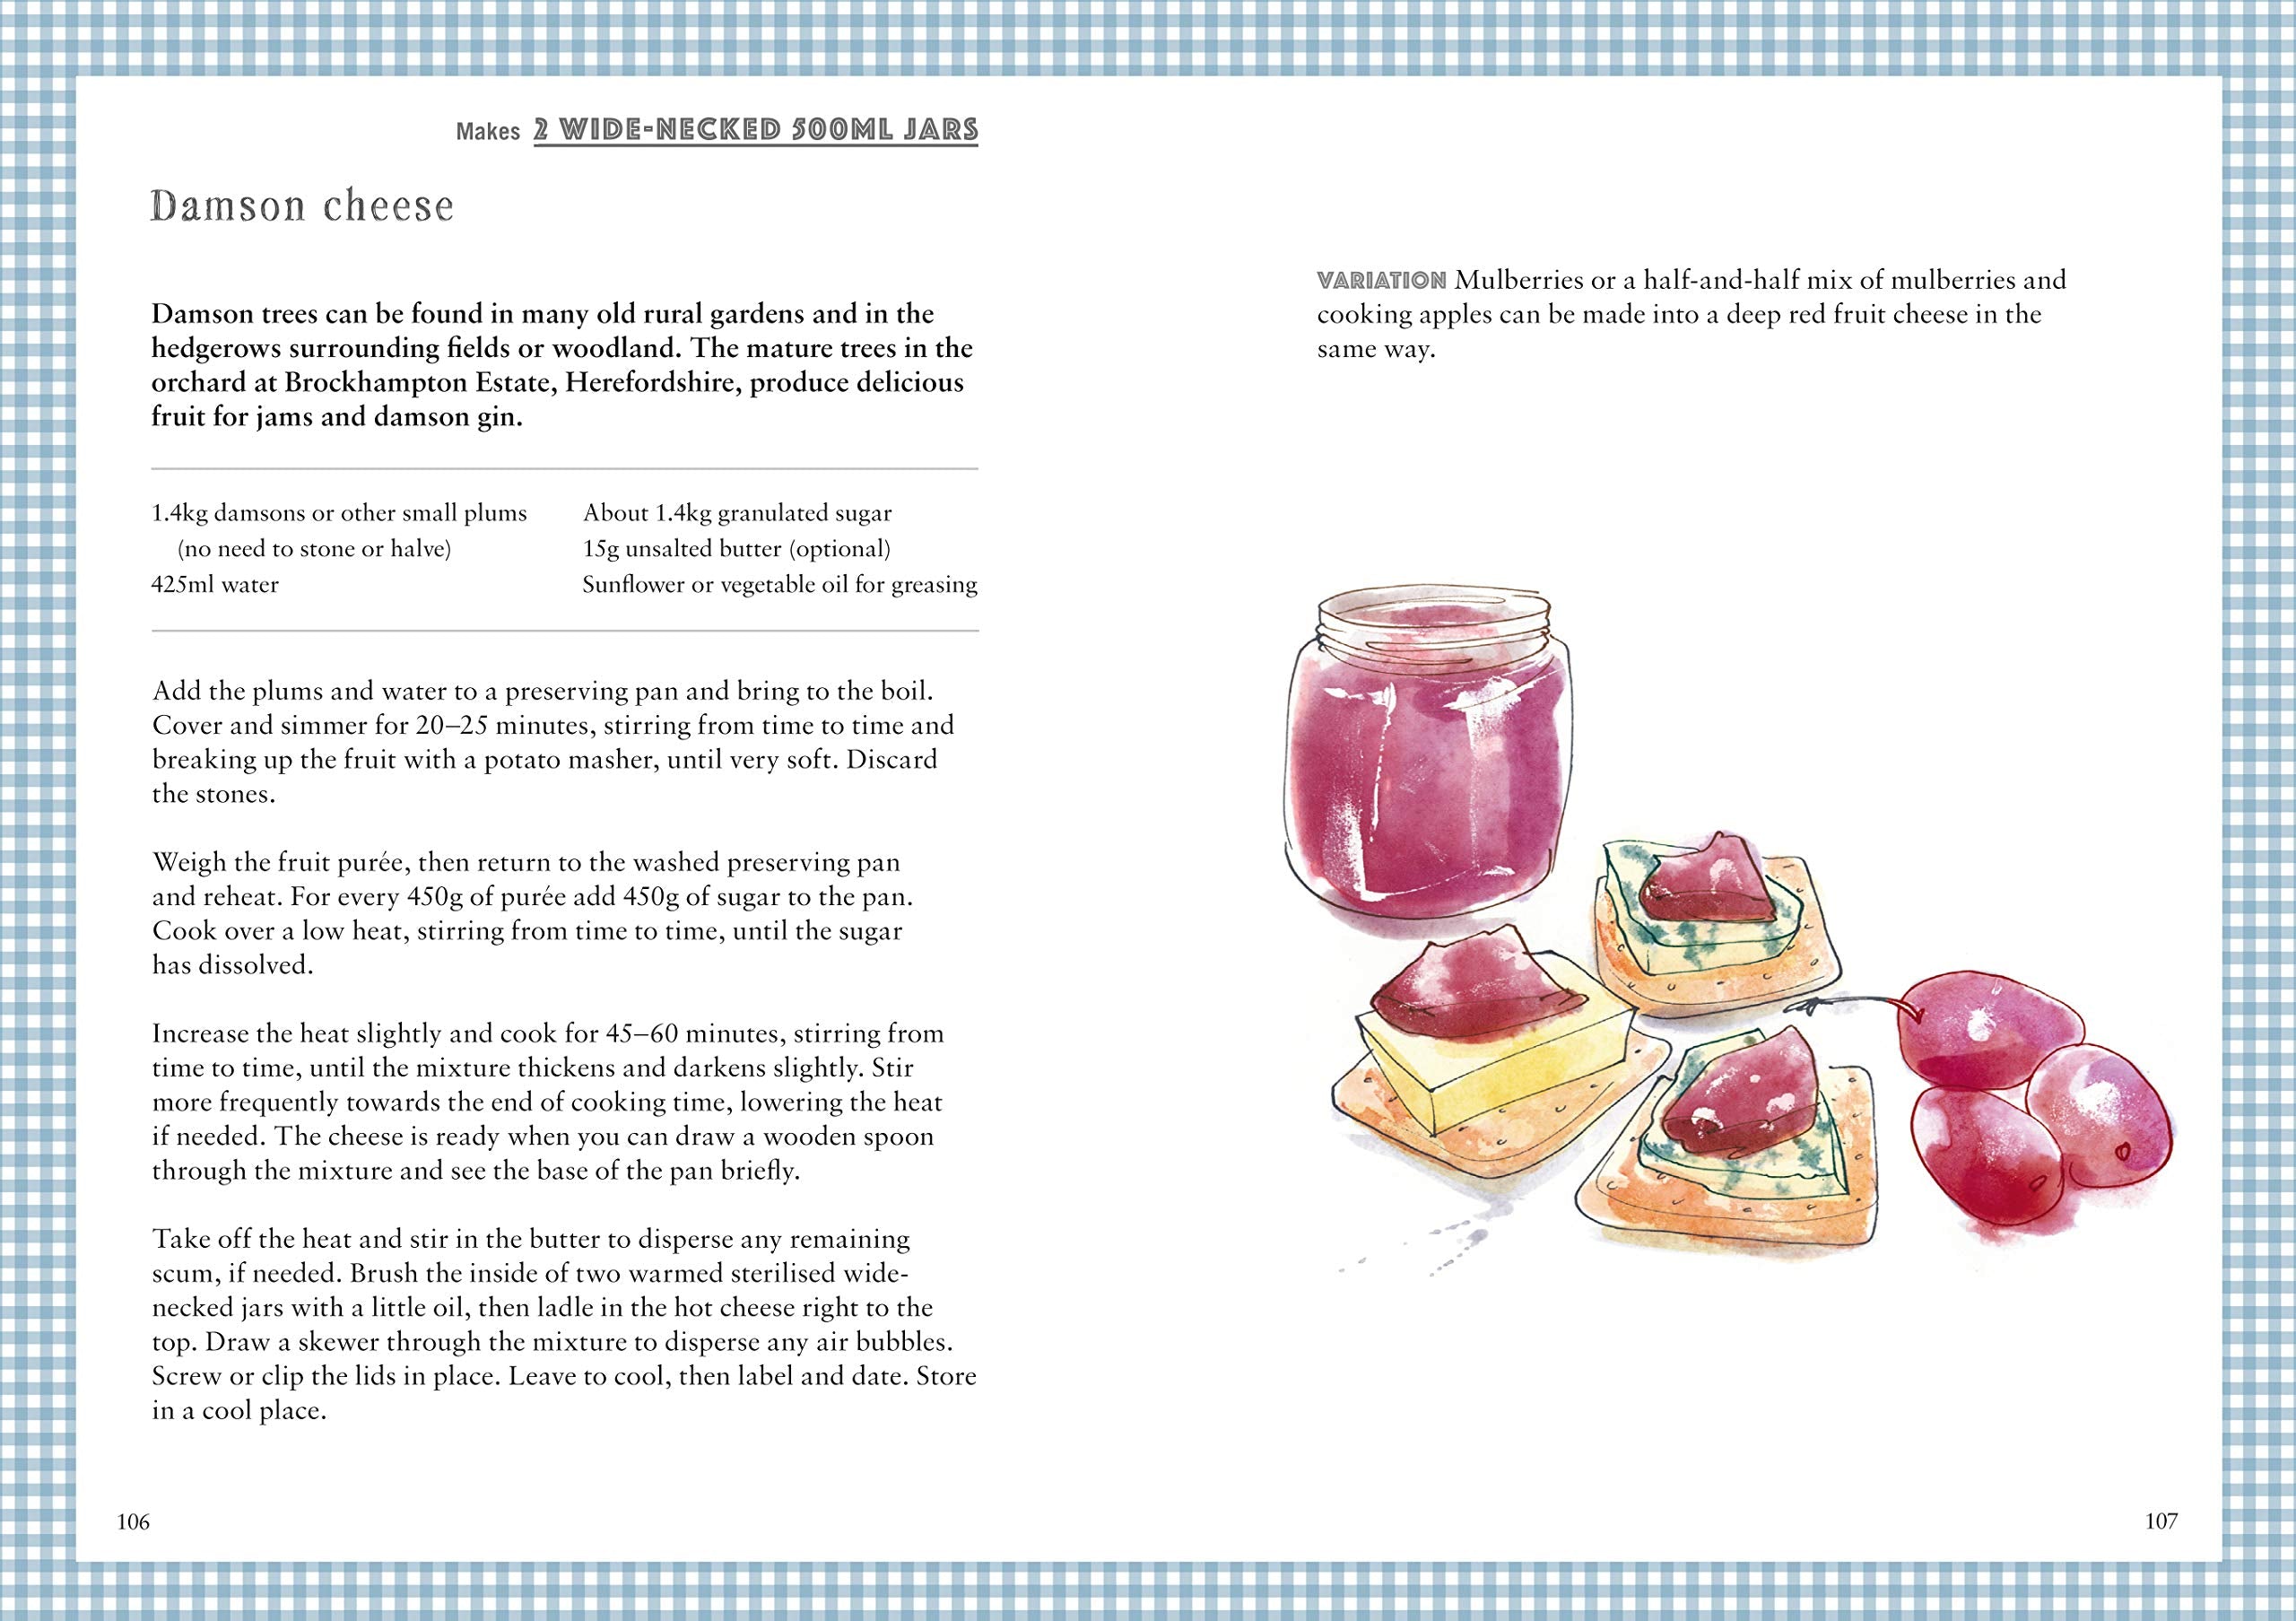 The National Trust Book of Jam: 70 Mouthwatering Recipes for Jam, Marmalades and Other Preserves (Sara Lewis)